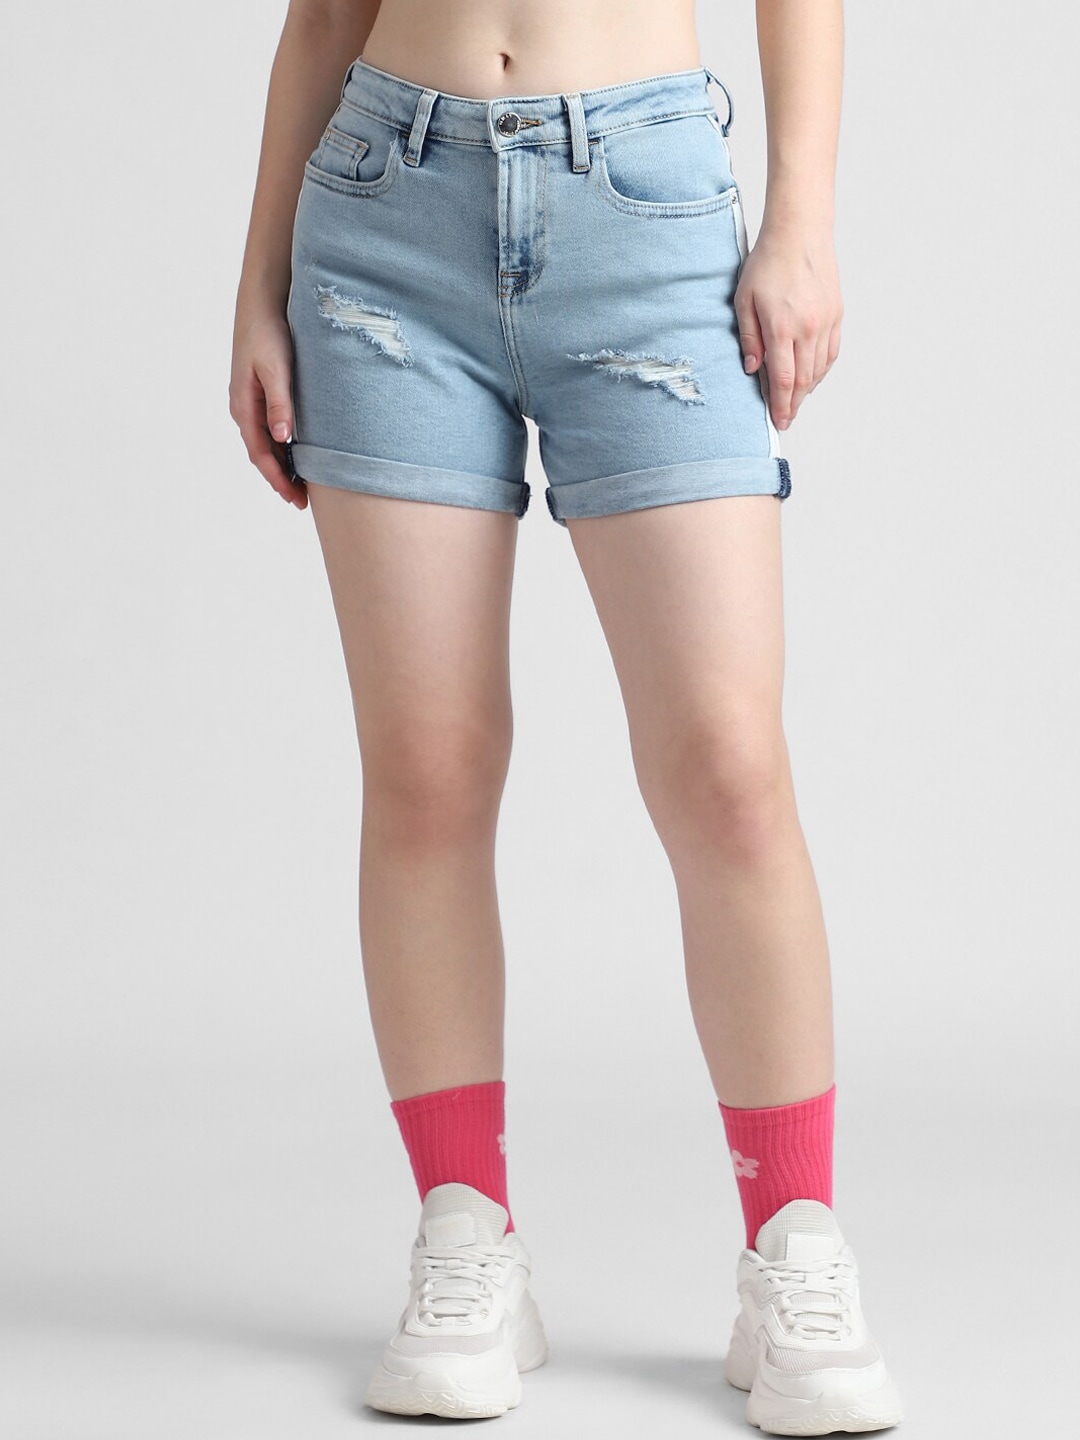 ONLY Women Washed High-Rise Distressed Denim Shorts Price in India